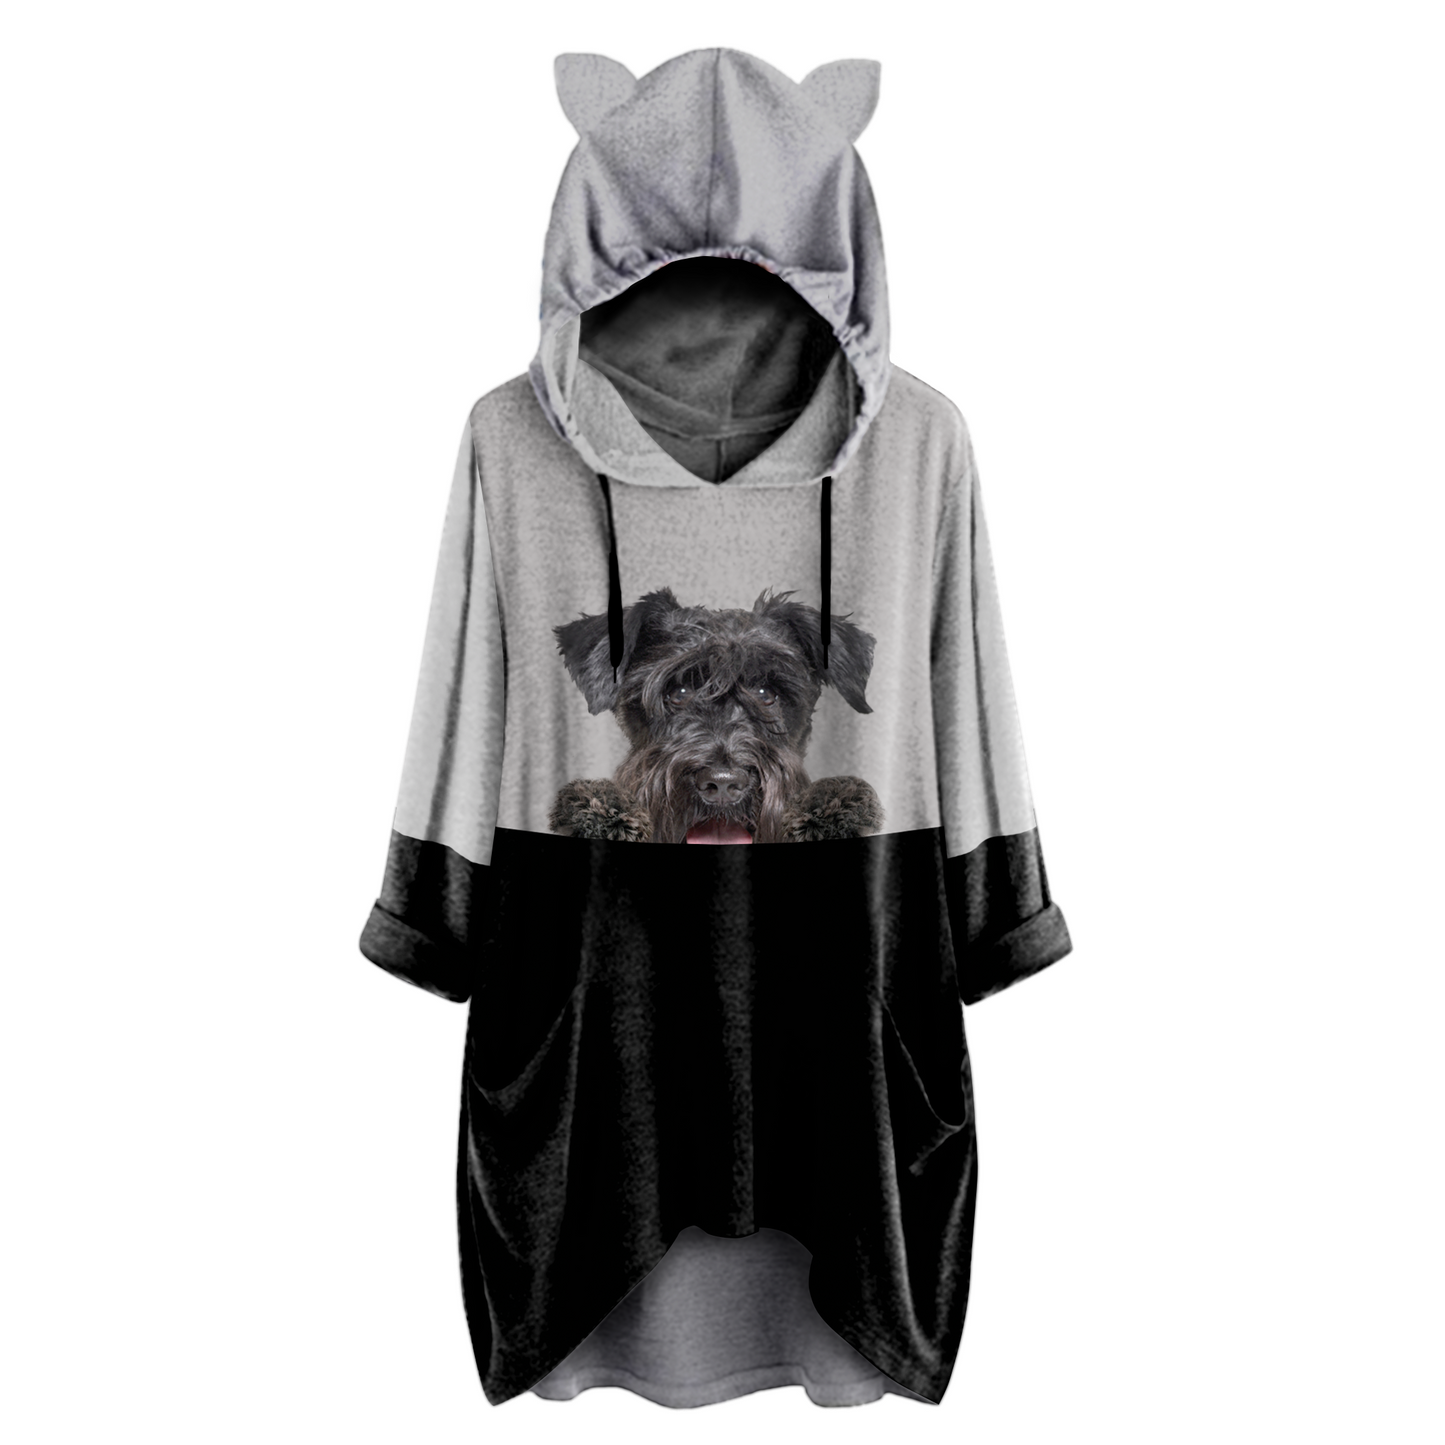 Can You See Me Now - Schnauzer Hoodie With Ears V1